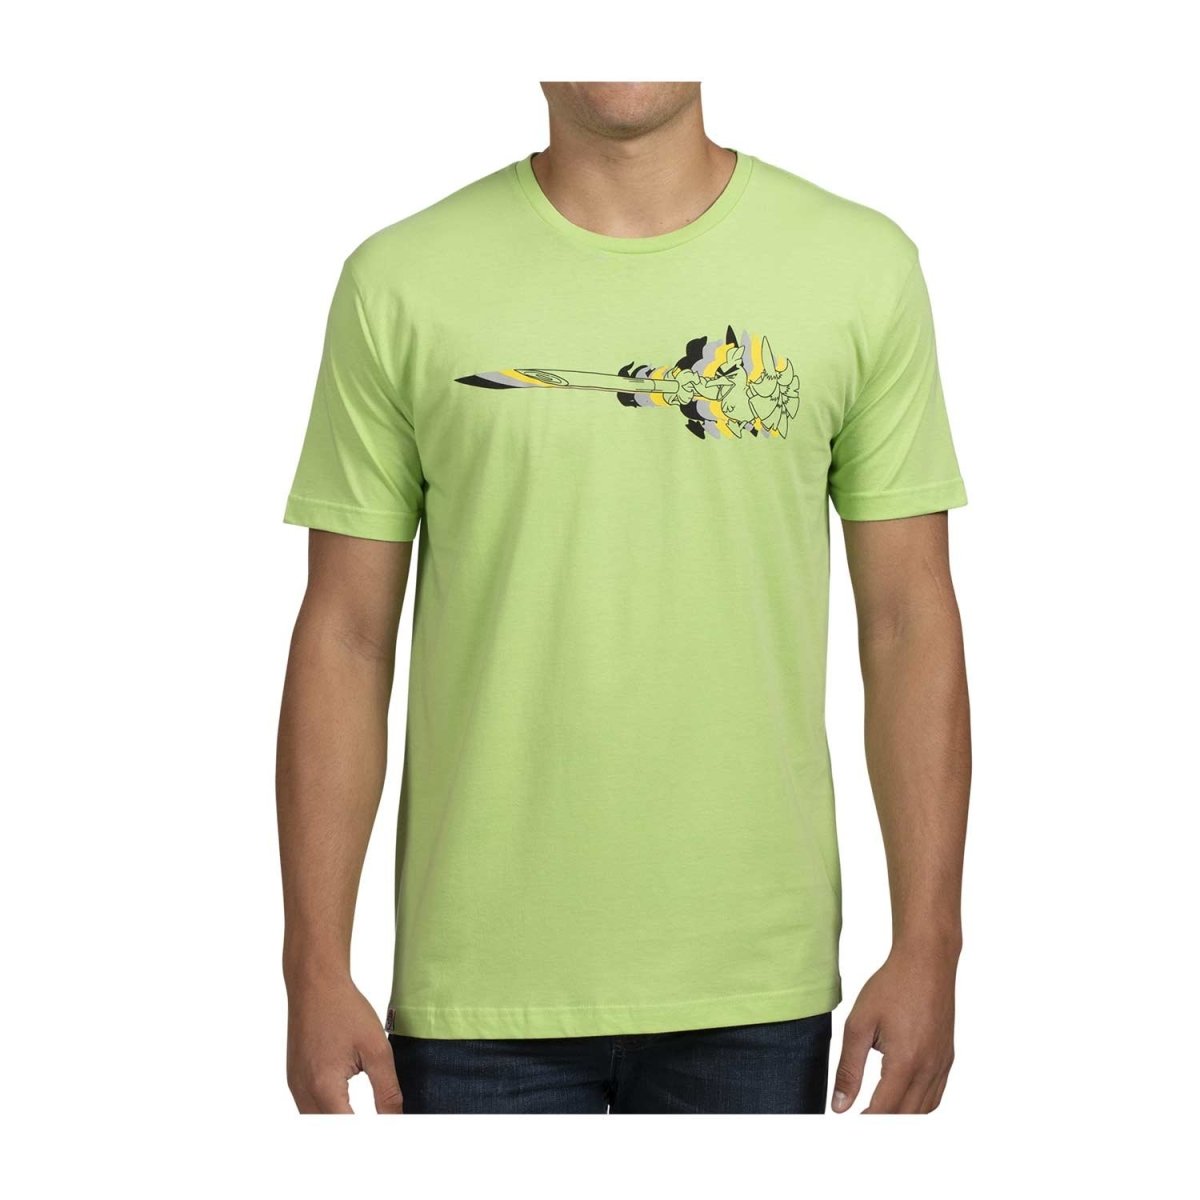 Sirfetch'd Green Relaxed Fit Crew Neck T-Shirt - Adult